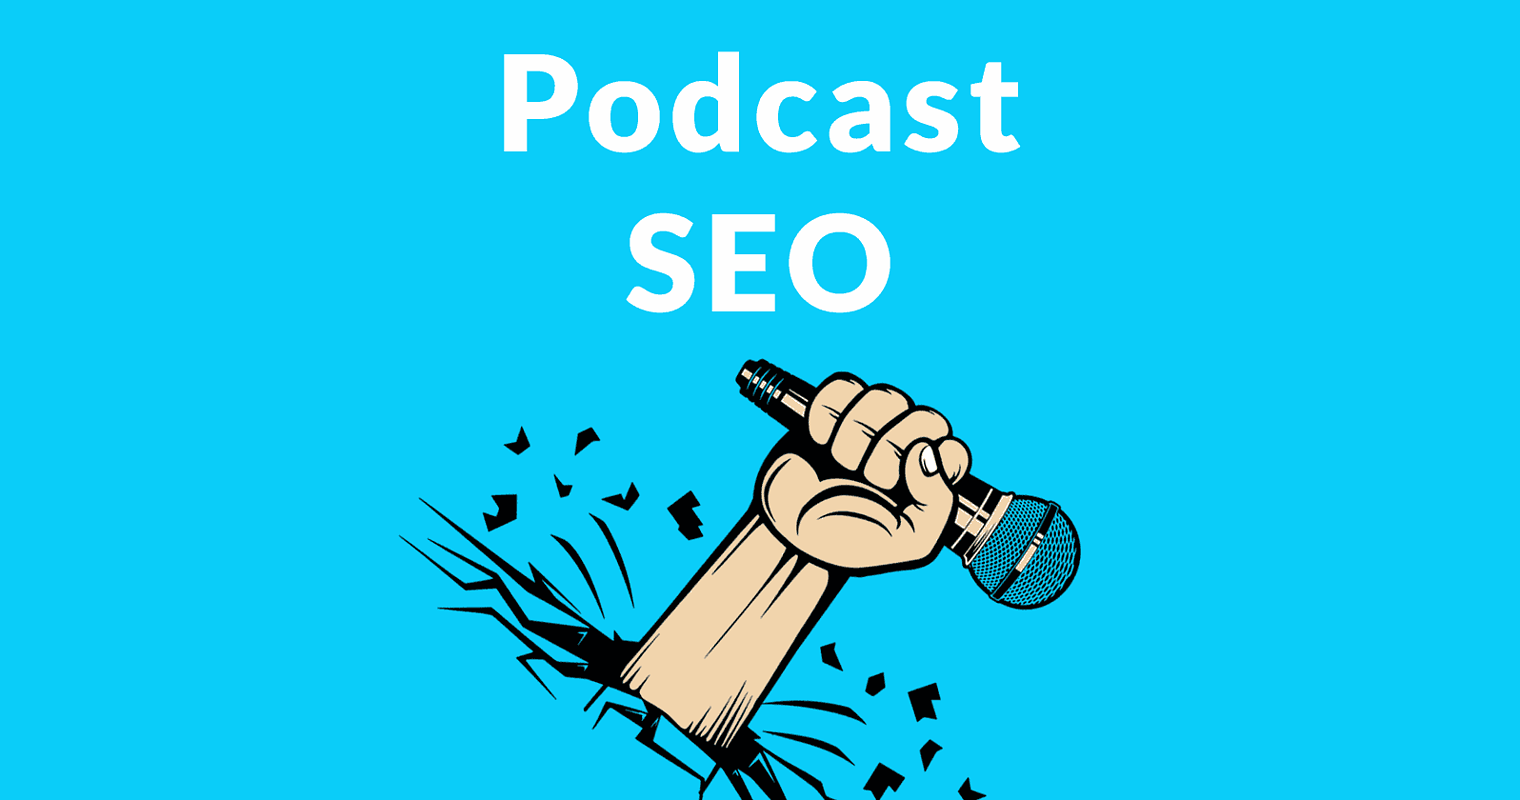 Google’s Mueller Answers How to SEO a Podcast Site